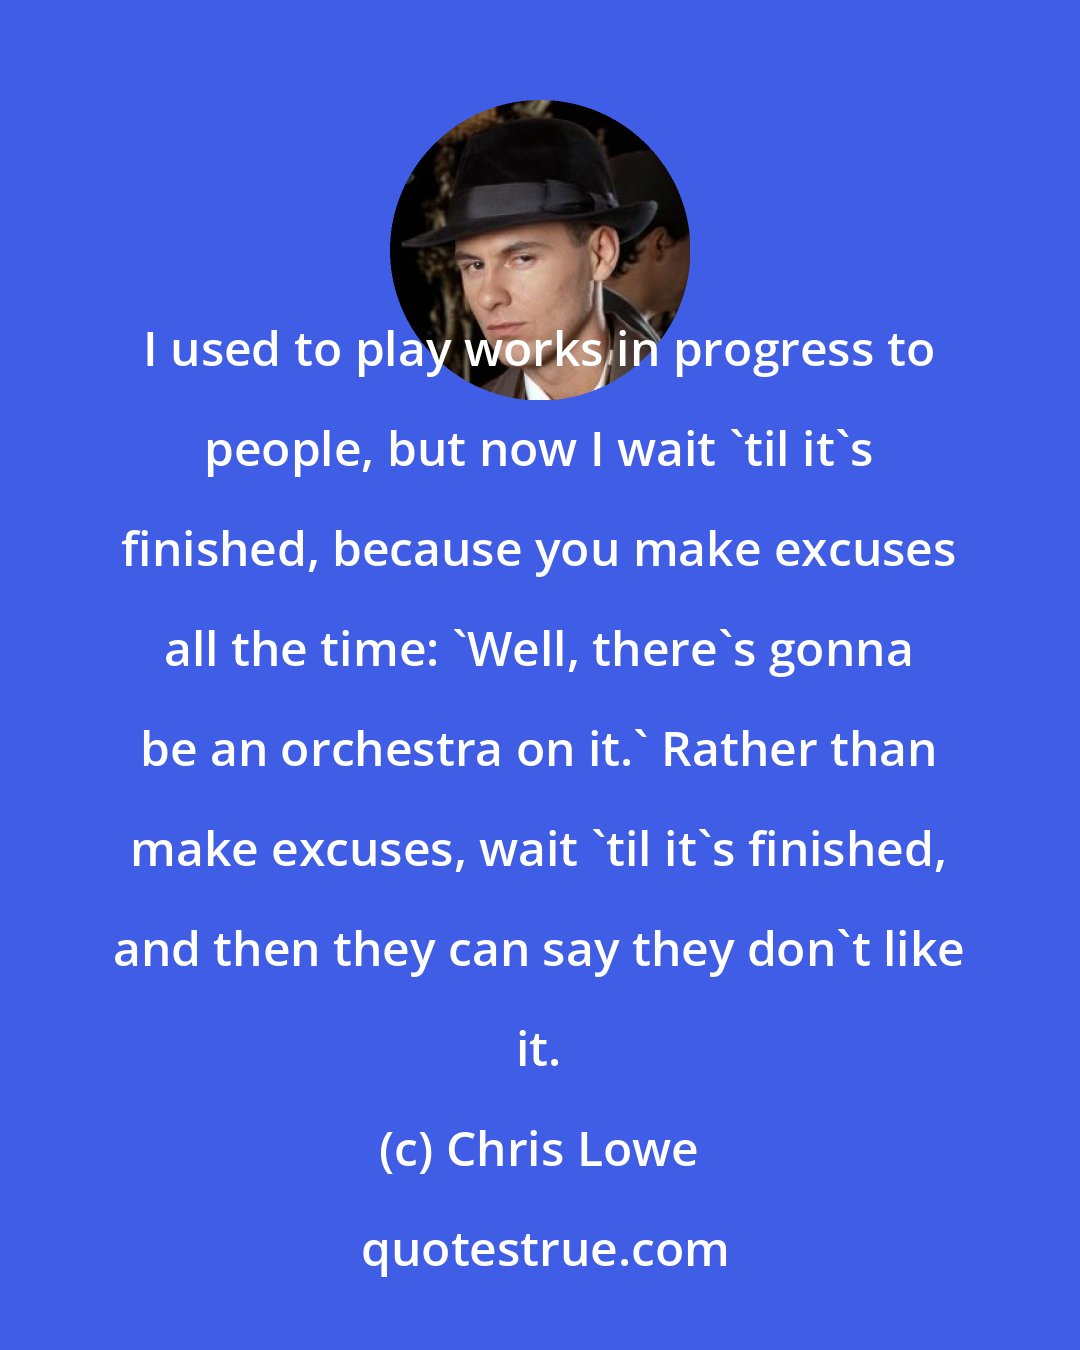 Chris Lowe: I used to play works in progress to people, but now I wait 'til it's finished, because you make excuses all the time: 'Well, there's gonna be an orchestra on it.' Rather than make excuses, wait 'til it's finished, and then they can say they don't like it.